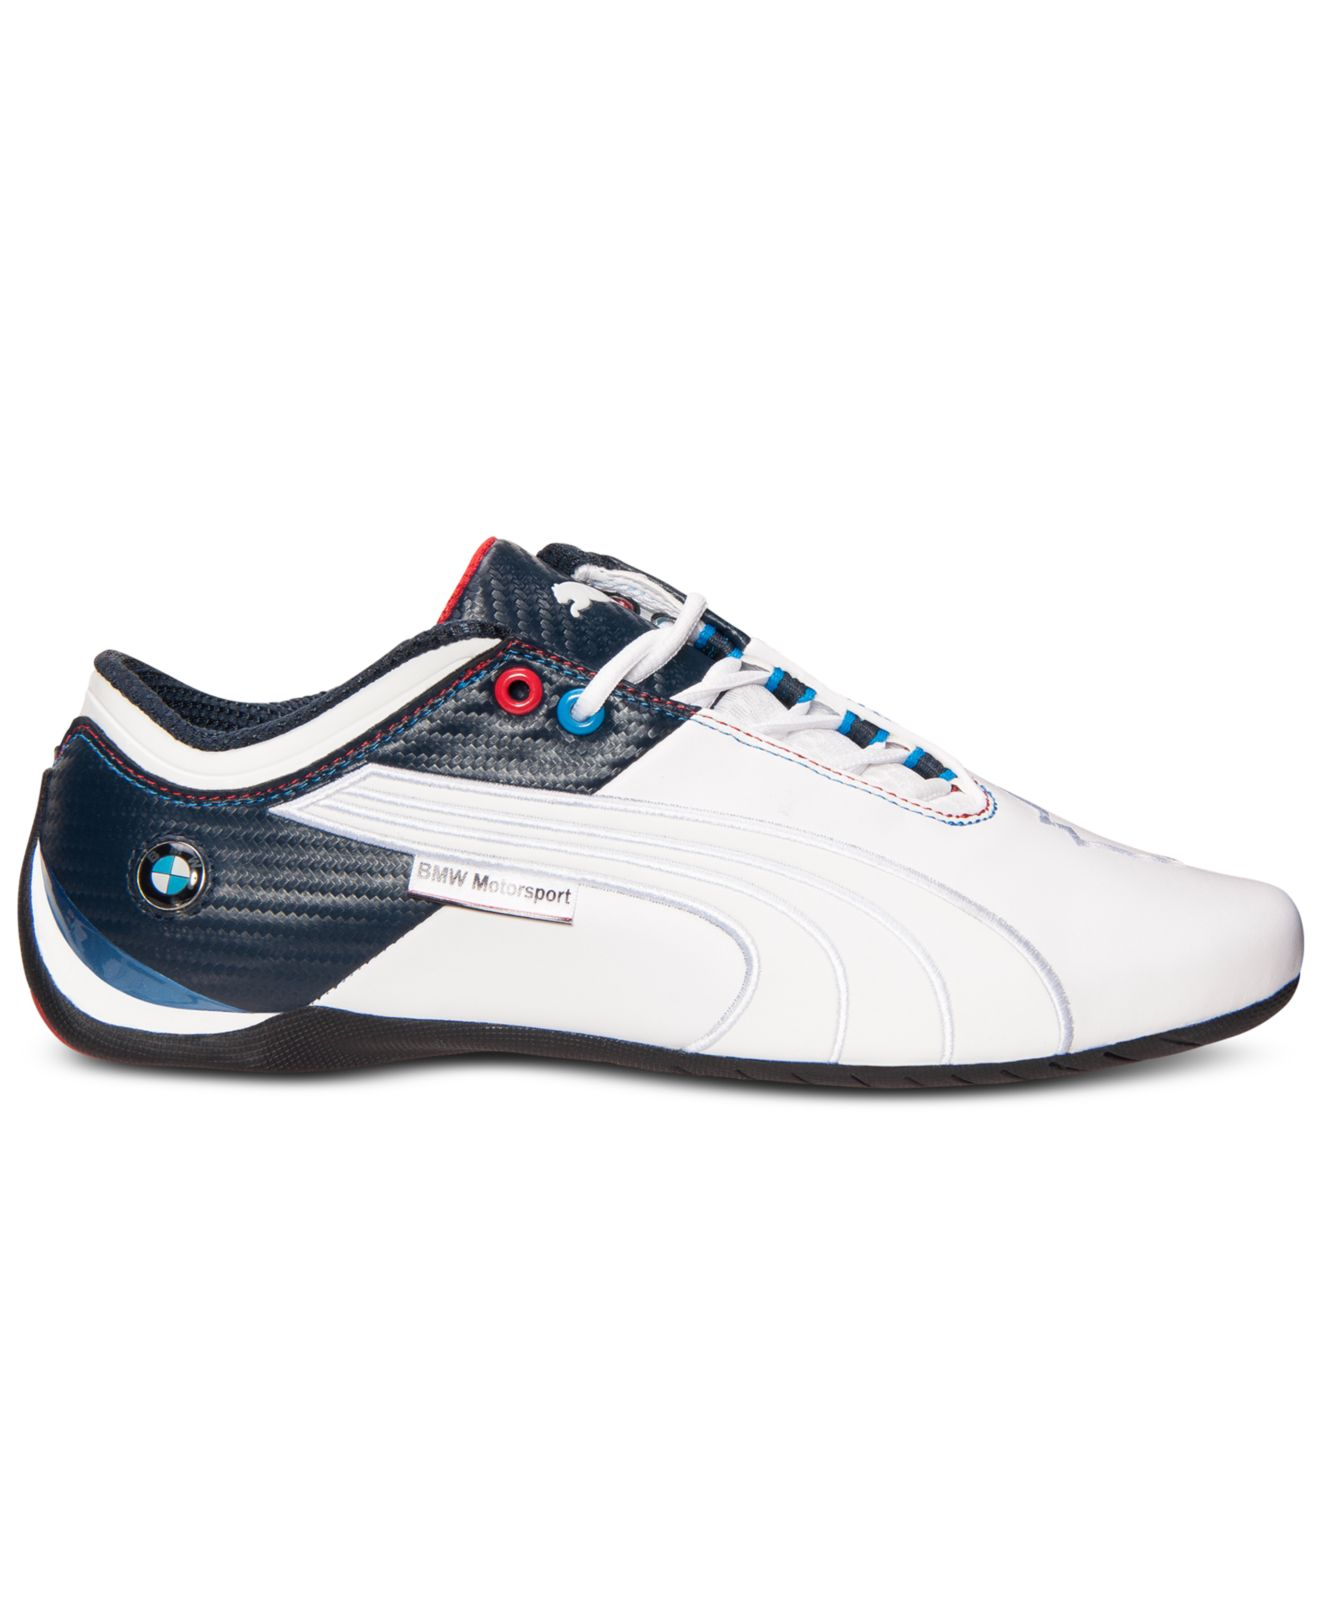 Lyst - Puma Mens Future Cat M1 Bmw Big Carbon Casual Sneakers From ...